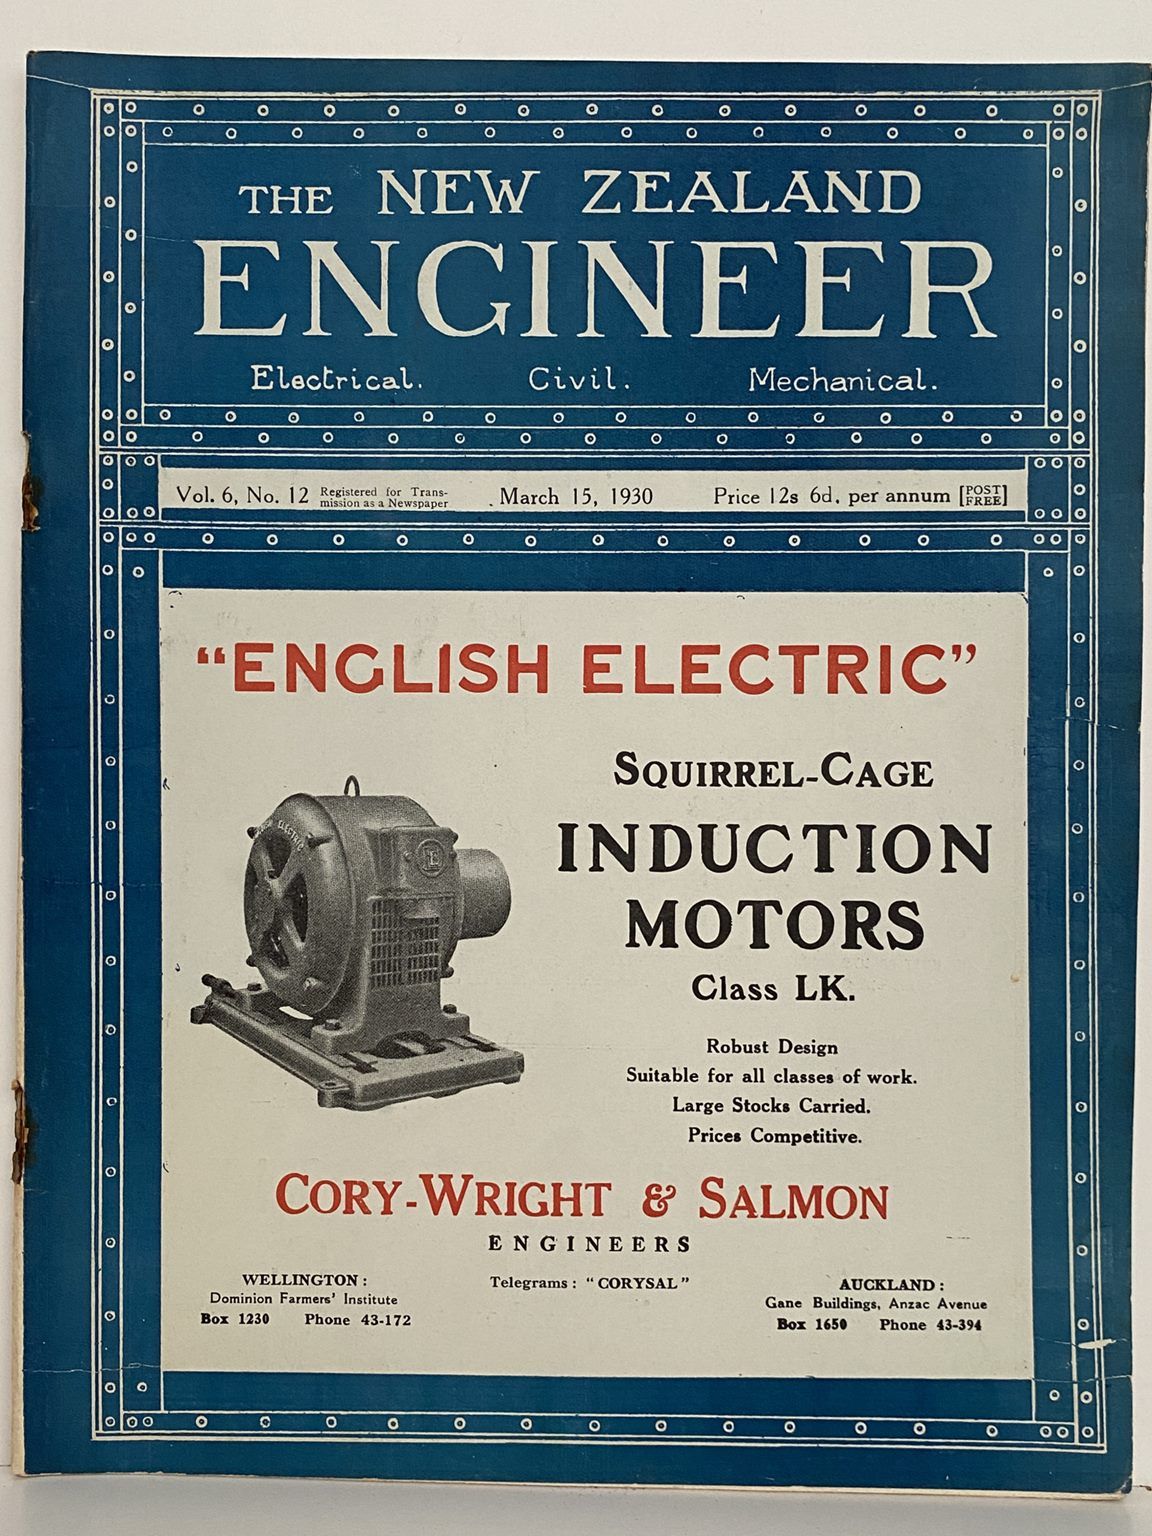 OLD MAGAZINE: The New Zealand Engineer Vol. 6, No. 11 - 15 February 1930